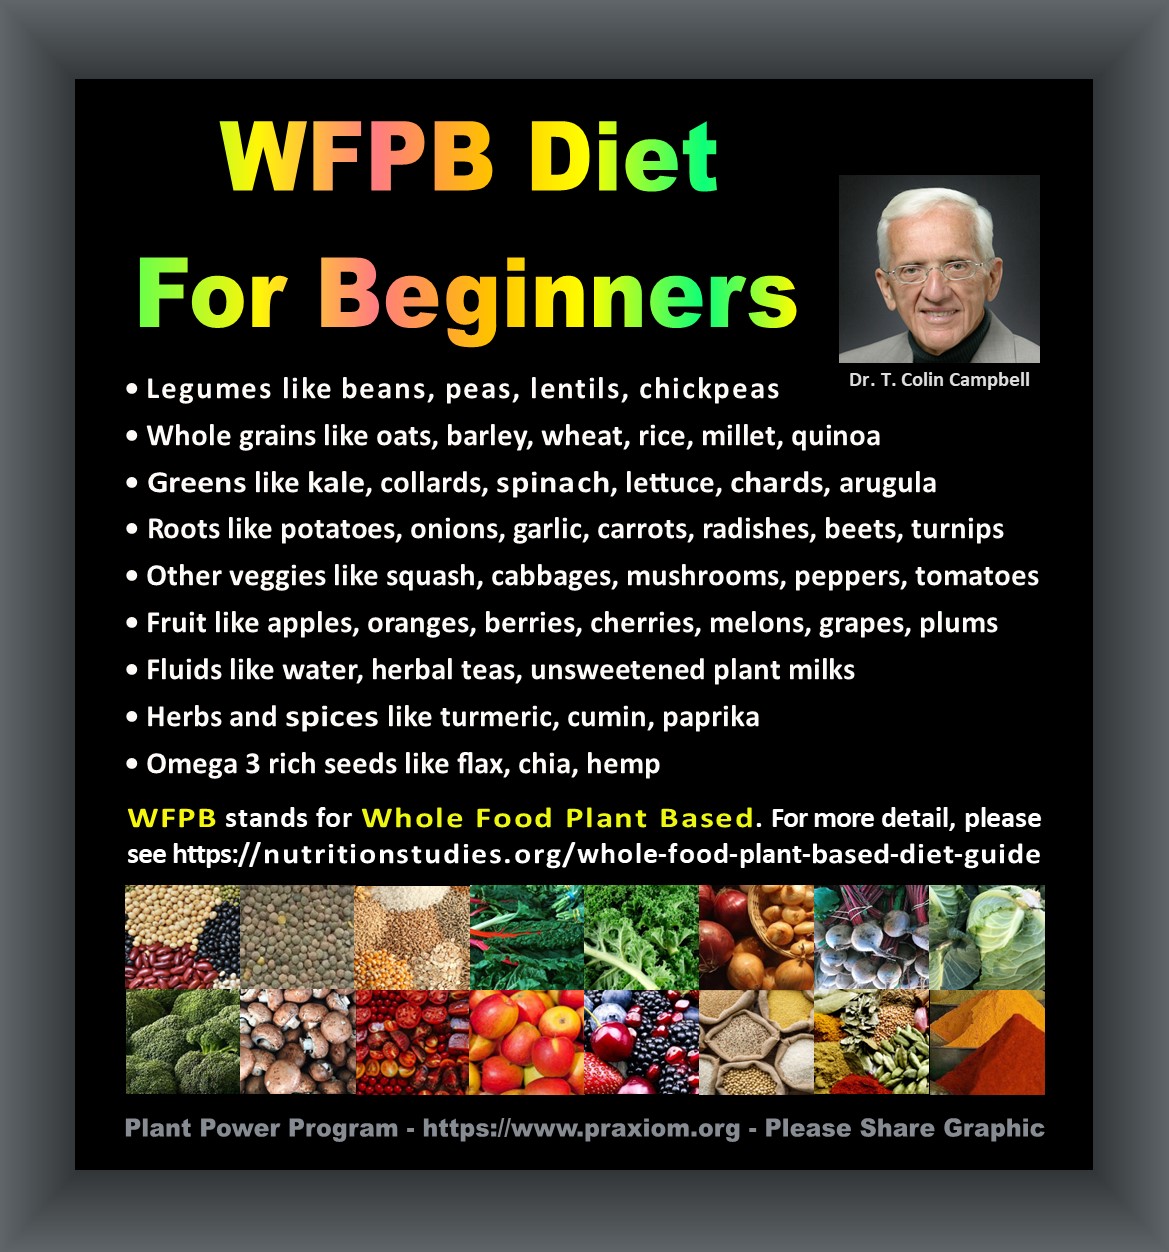 WFPB Diet for Beginners - Dr. T. Colin Campbell